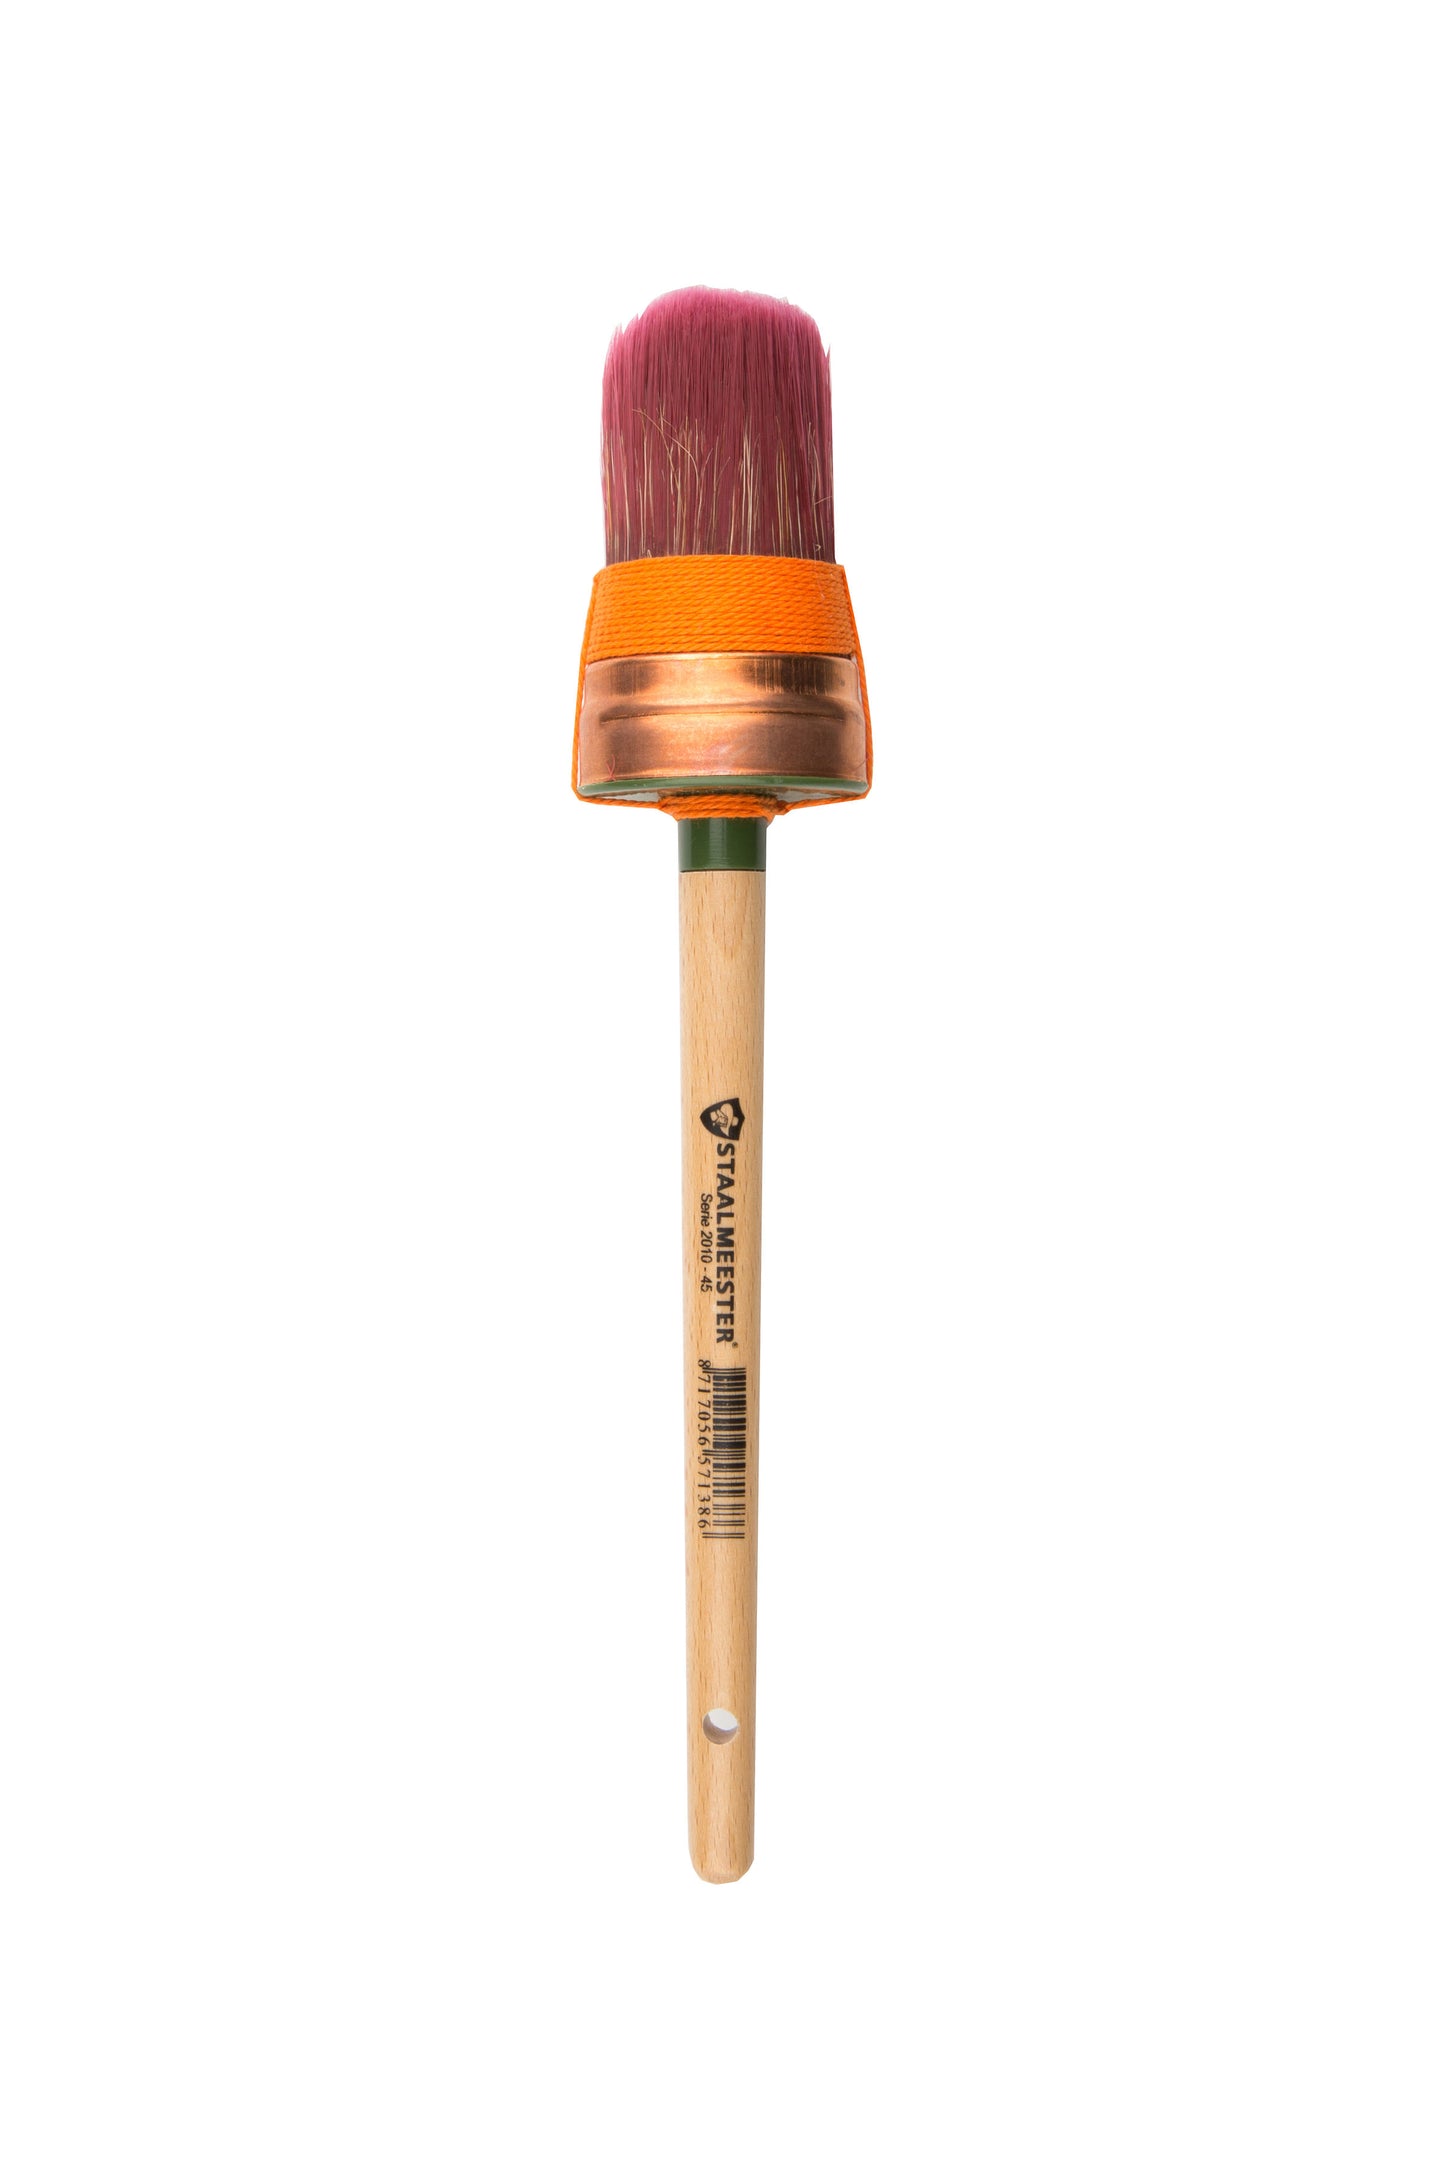 Paint Brush - Staalmeester Oval #45